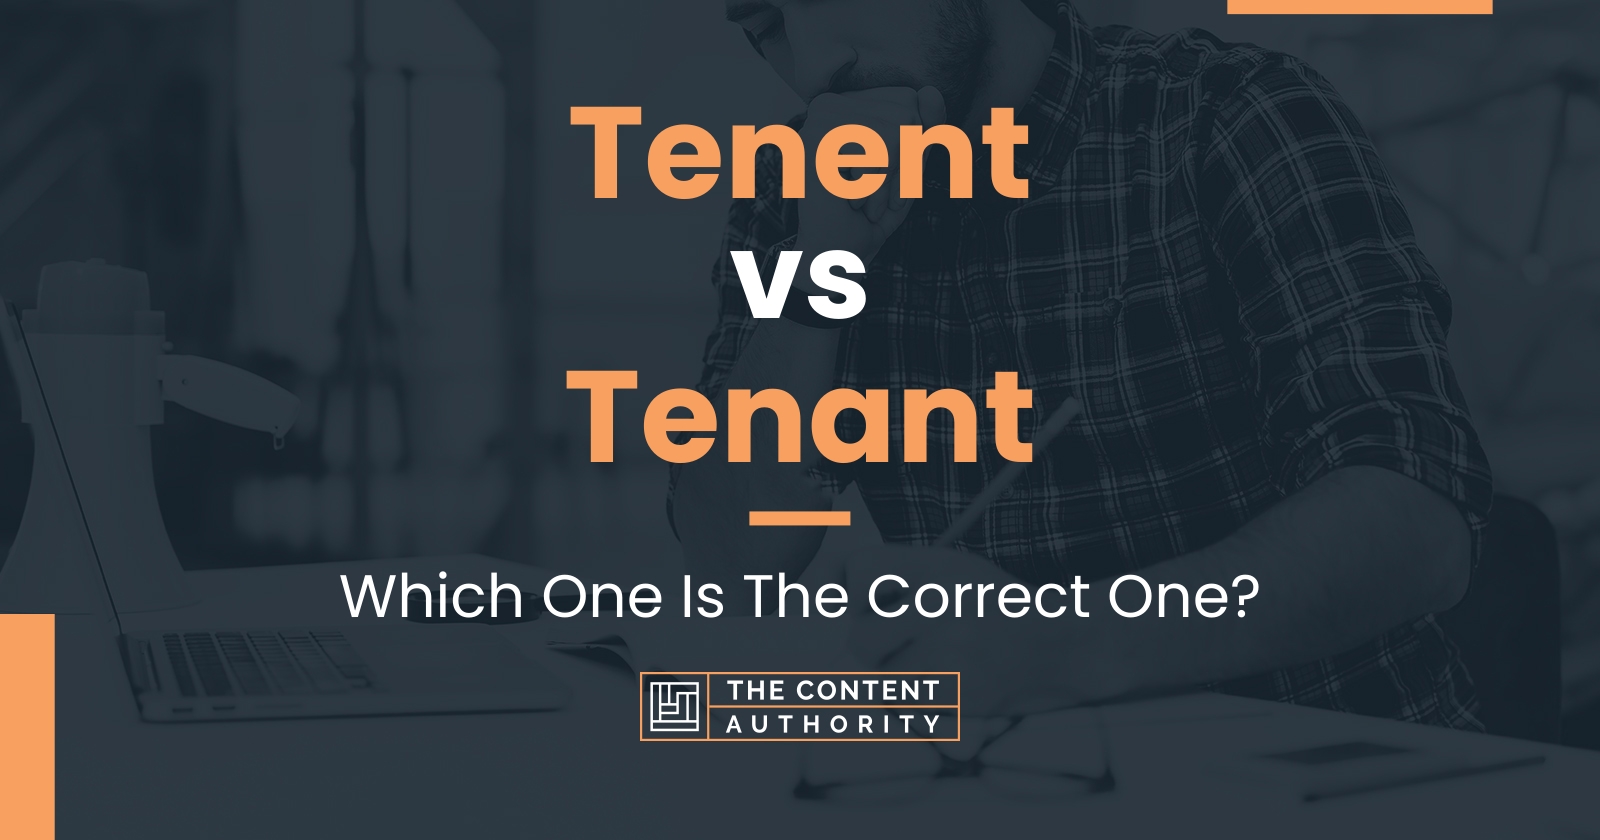 Tenent vs Tenant: Which One Is The Correct One?